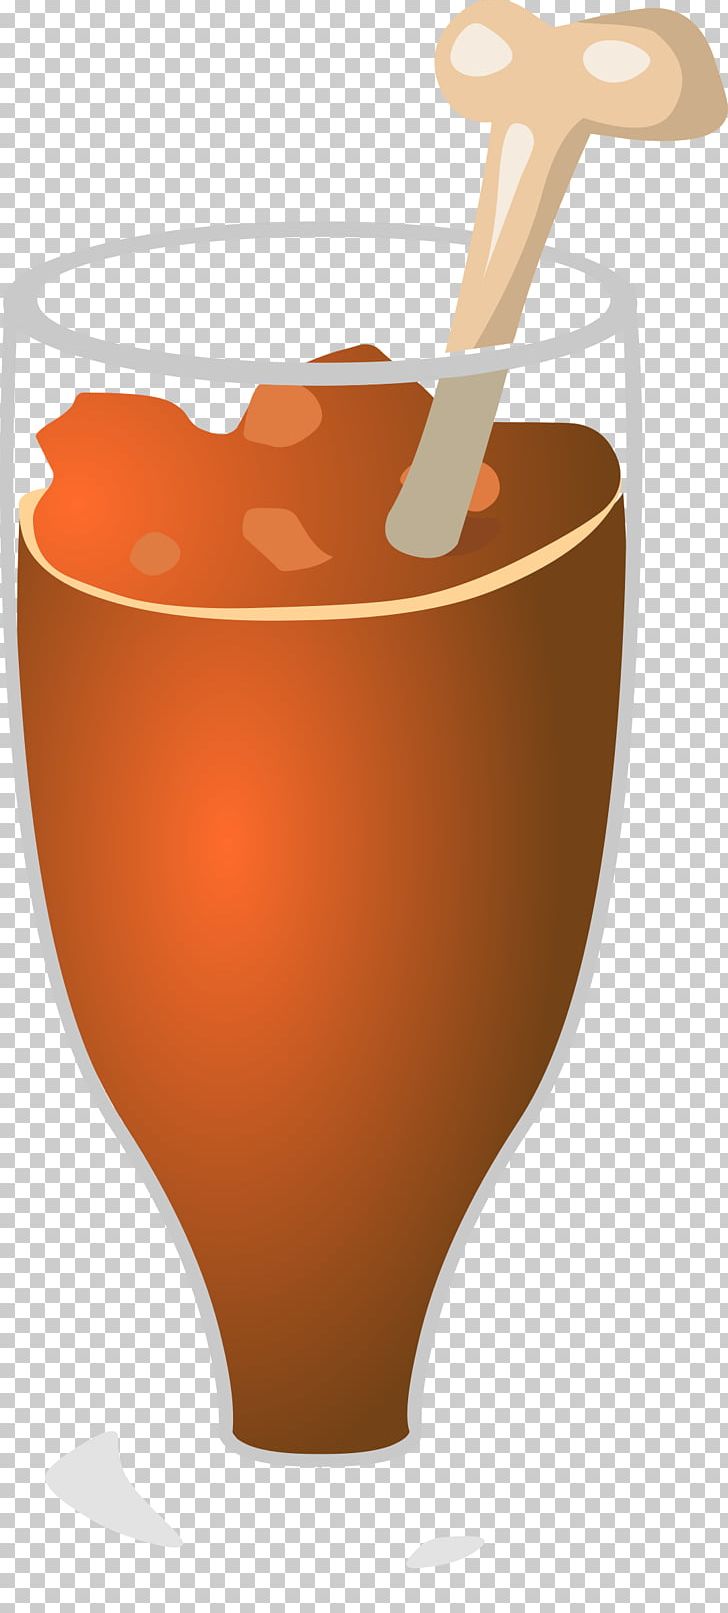 Smoothie Milkshake Health Shake Sloe Gin Drink PNG, Clipart, Alcoholic Drink, Chocolate, Coffee Cup, Cup, Drink Free PNG Download